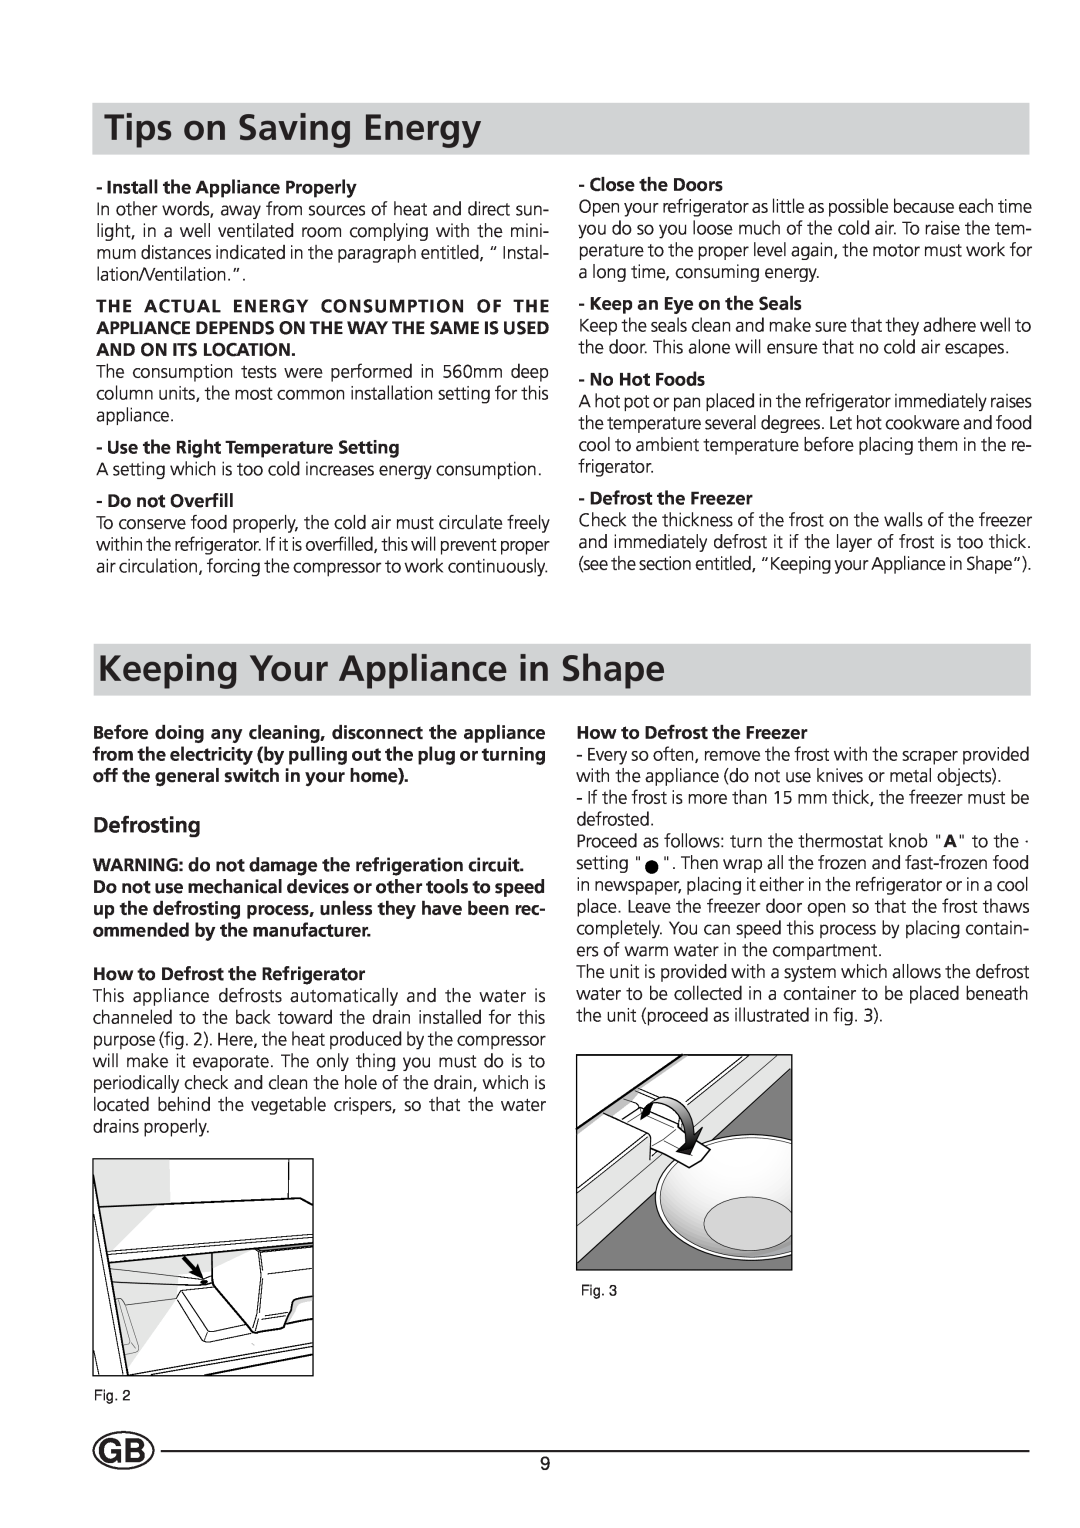 Ariston BC 311 I manual Tips on Saving Energy, Keeping Your Appliance in Shape, Defrosting 